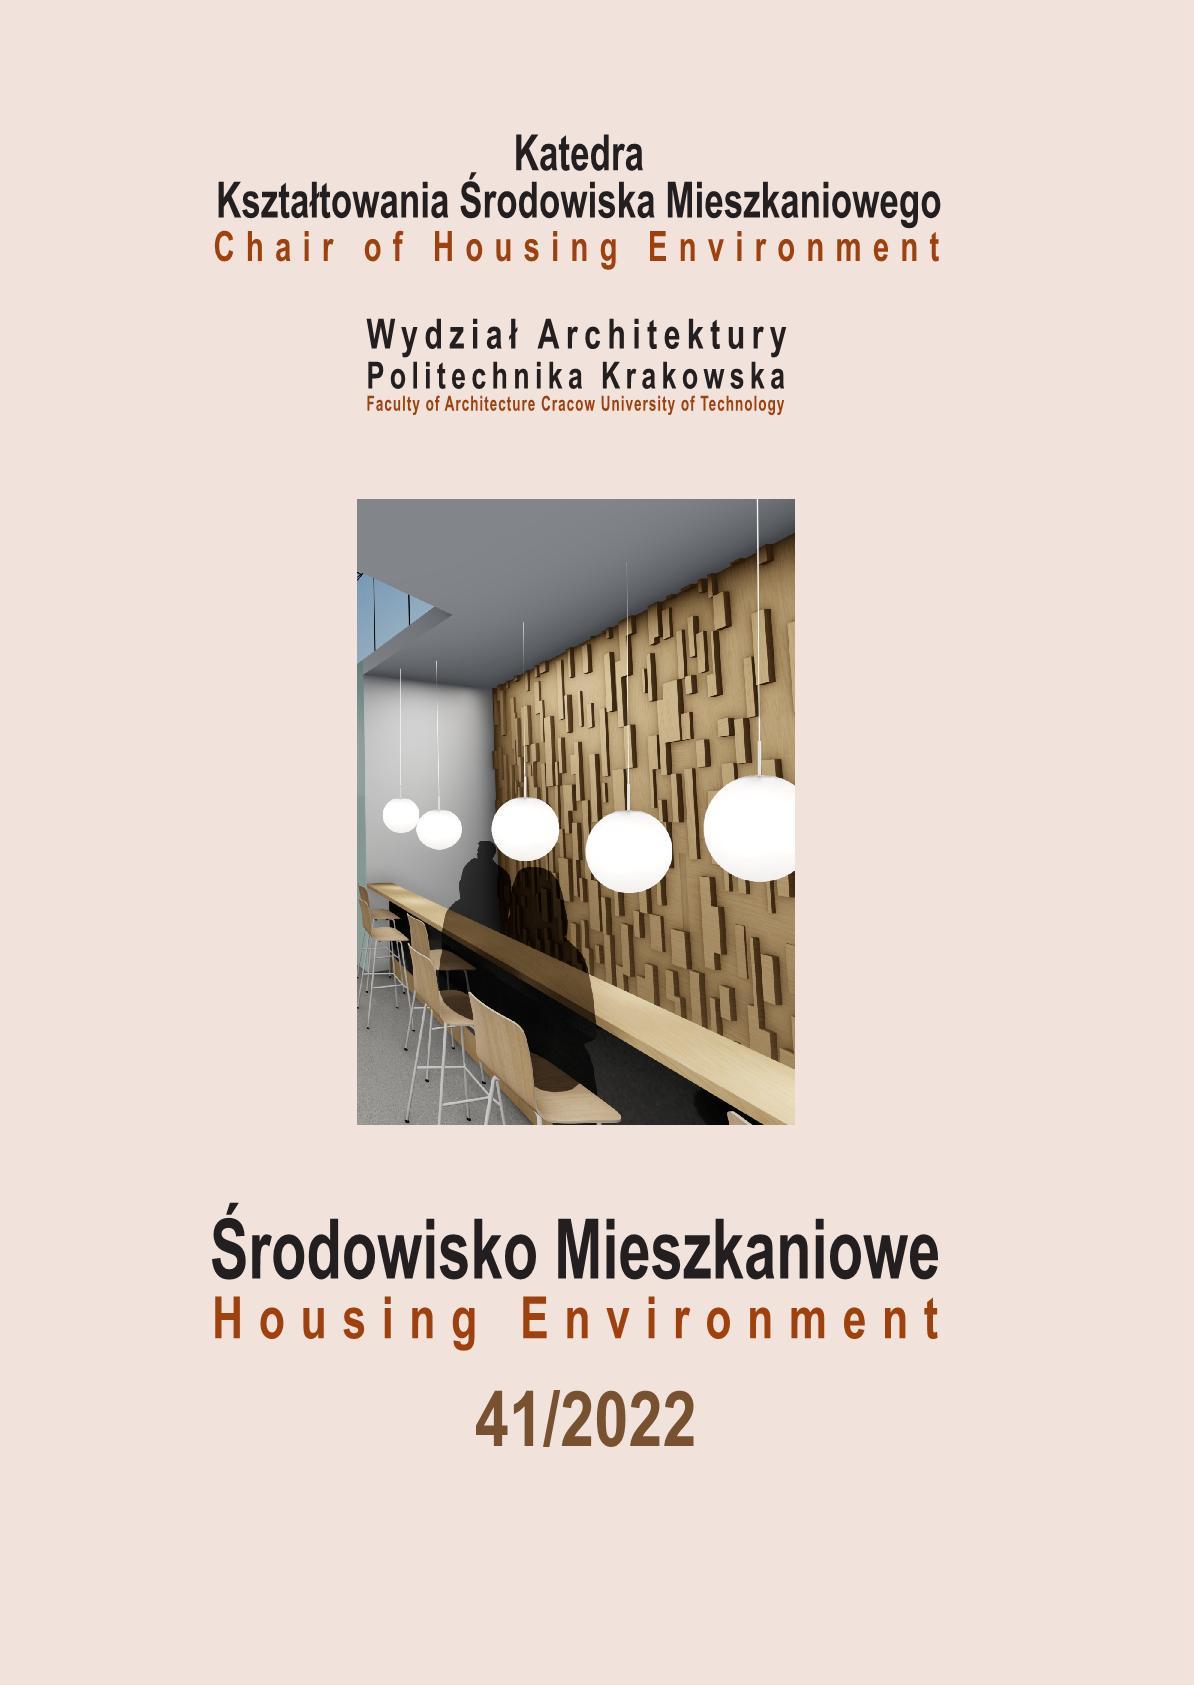 Aid architecture. Implementation of the Paper Partition System and Styrofoam Housing System in the context of the war in Ukraine. Cover Image